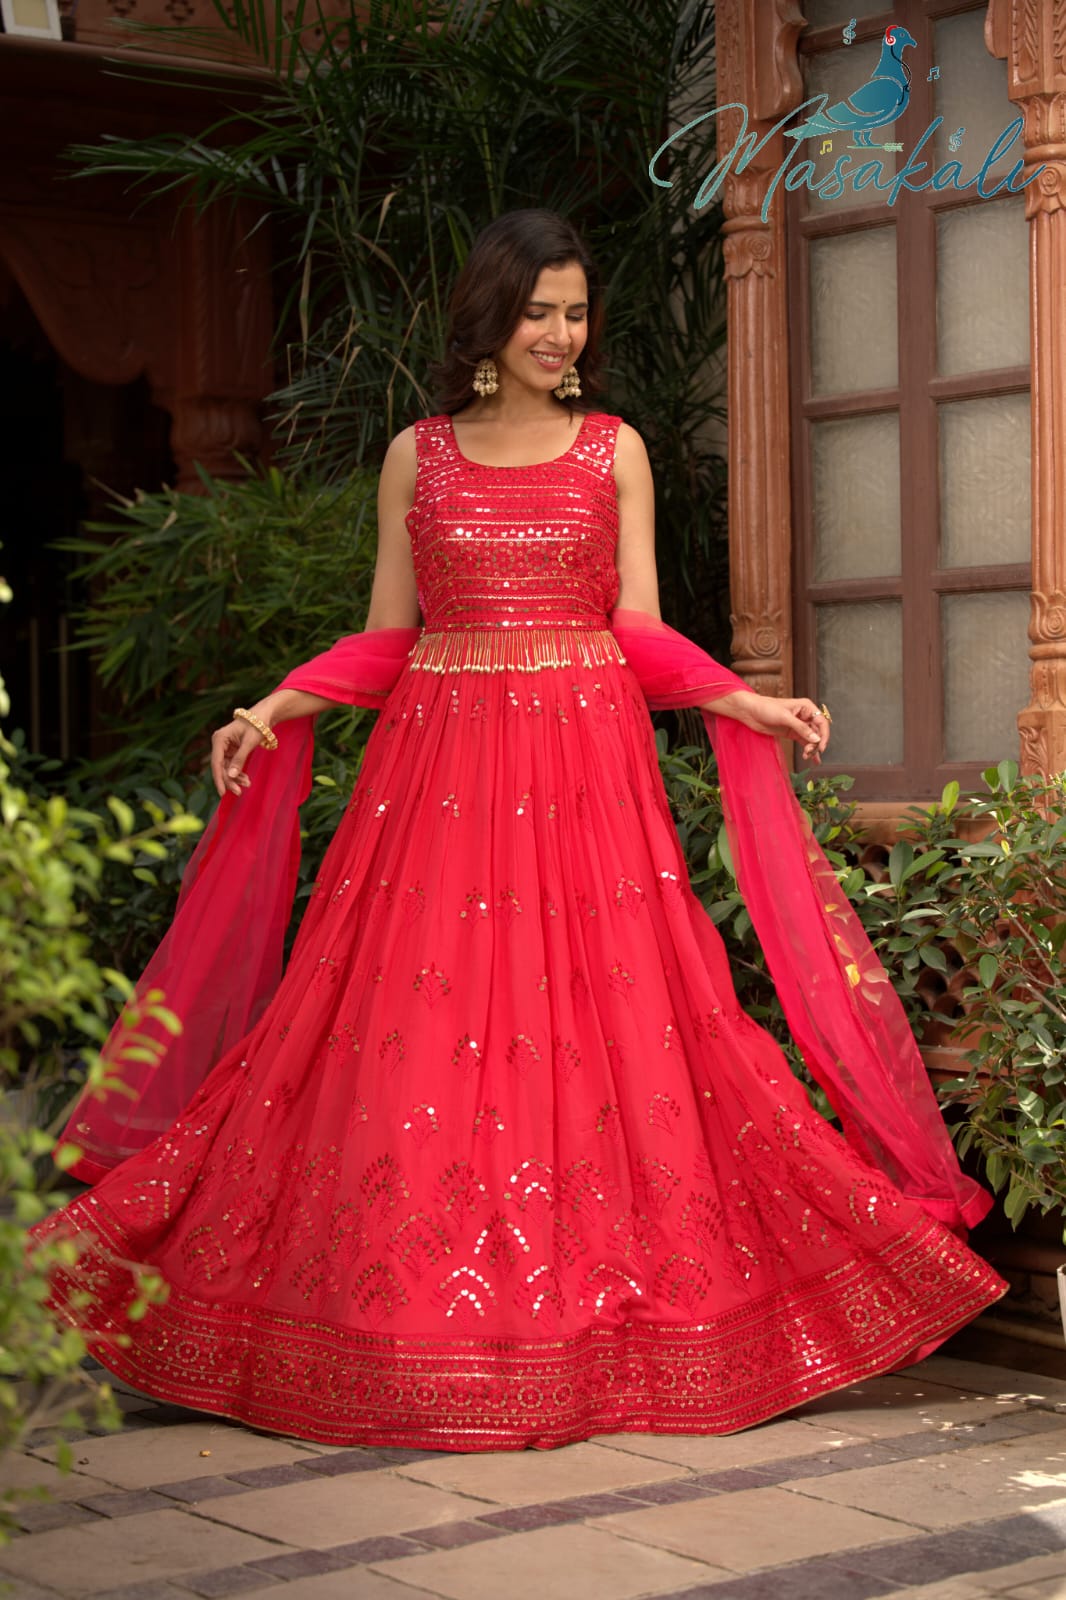 Red Solid Angrakha A-Line Dress with Dupatta